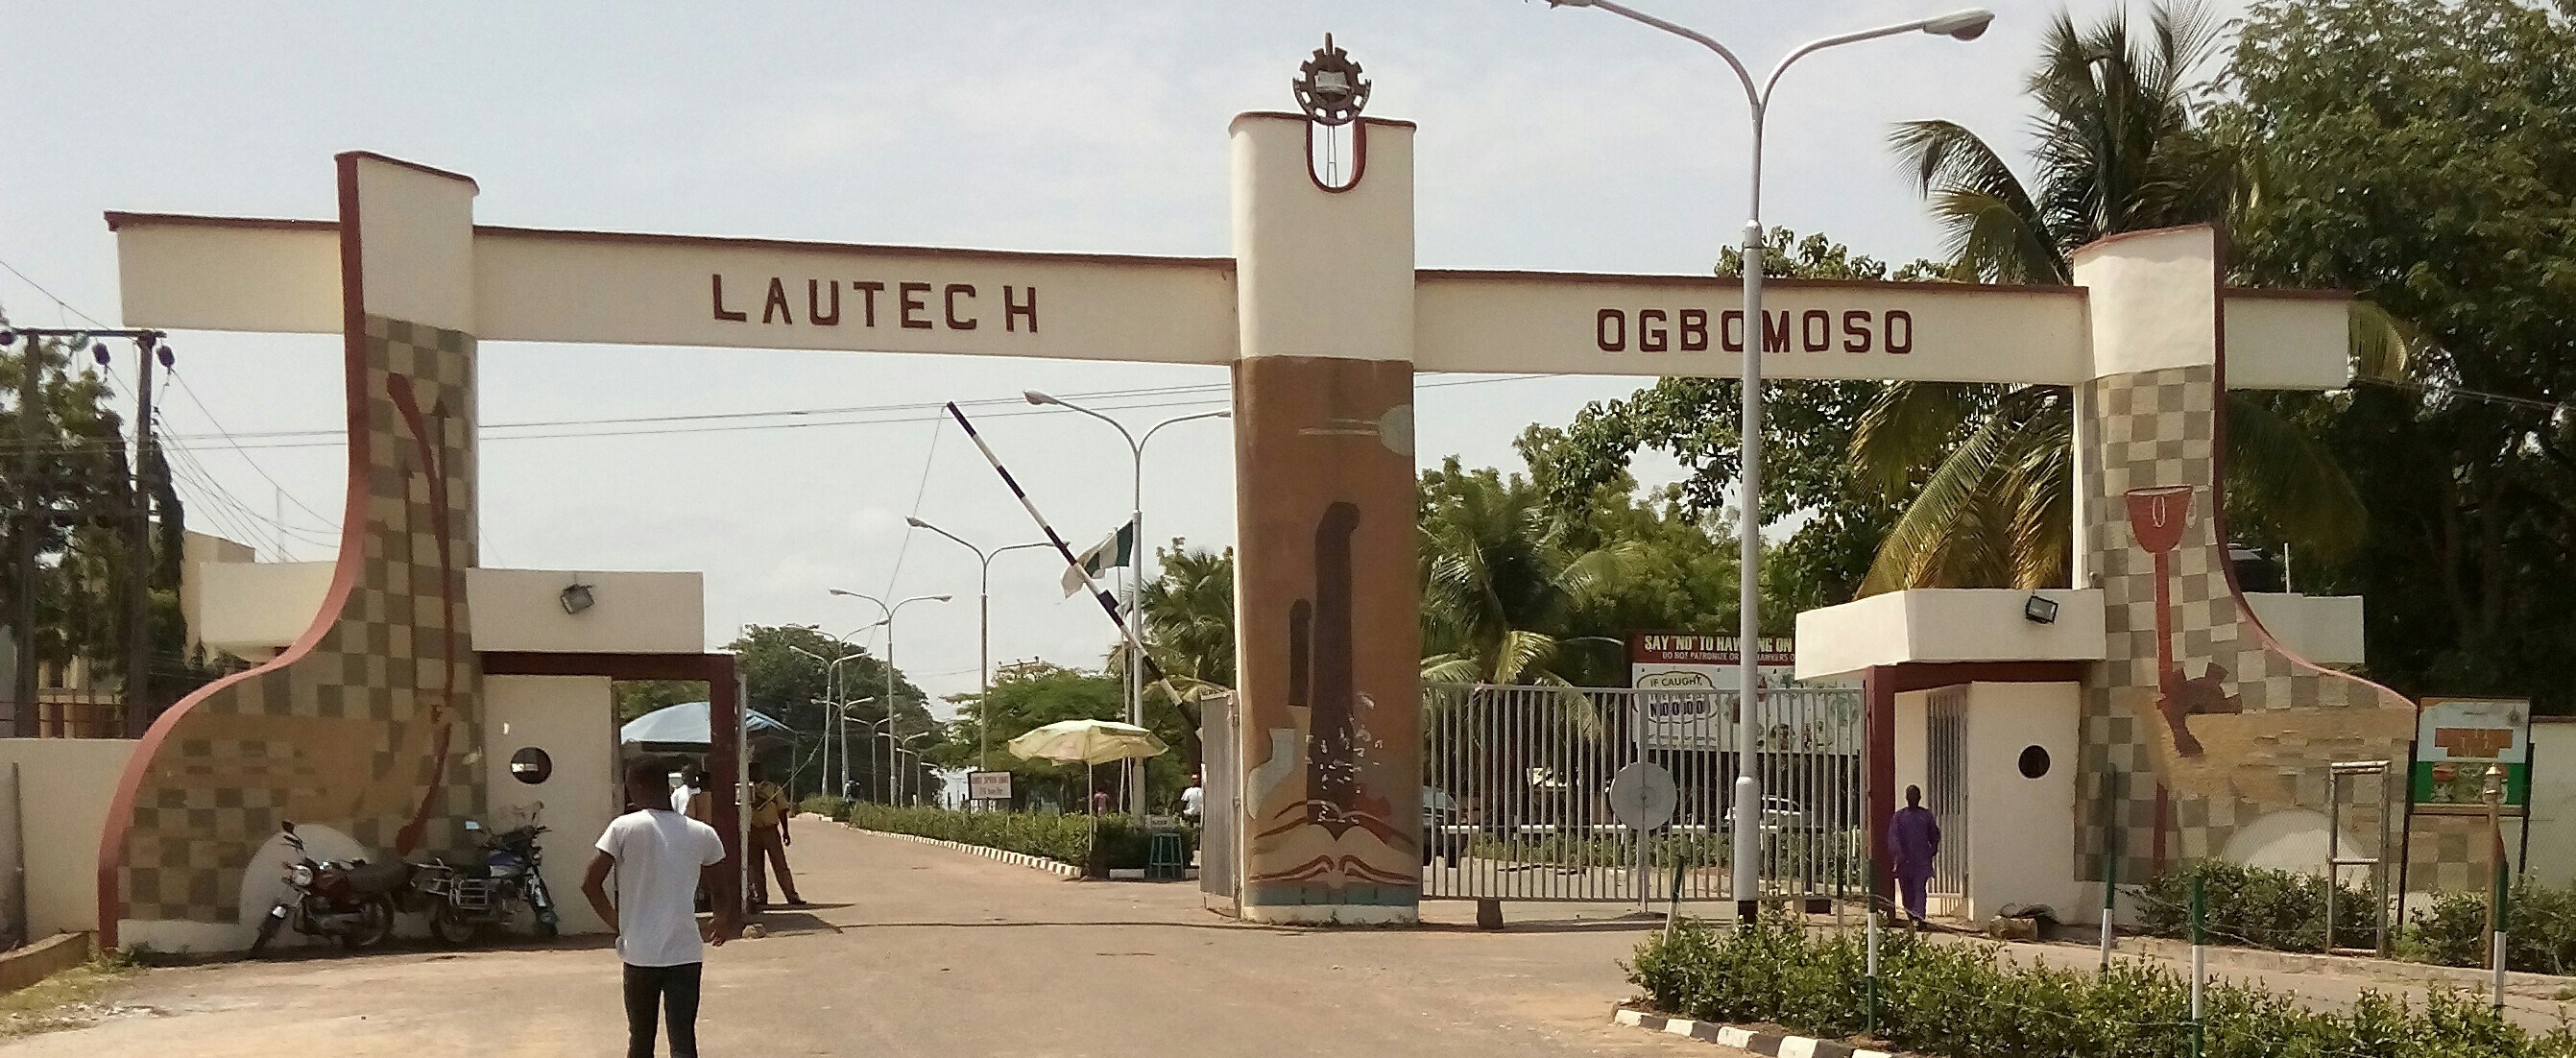 {FEATURE} LAUTECH: Waning Monument?